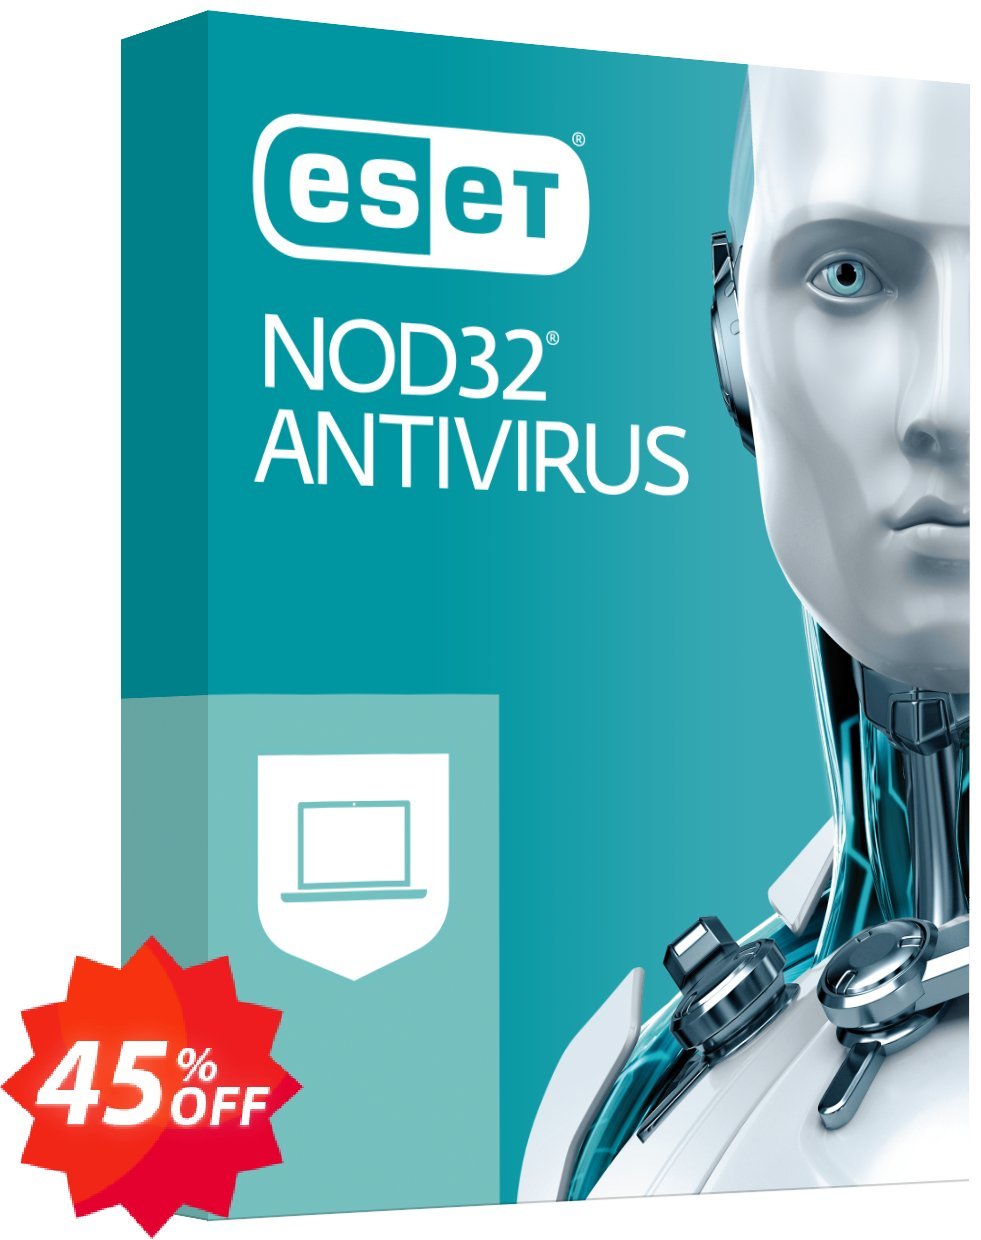 ESET NOD32 Antivirus -  3 Years 4 Devices Coupon code 45% discount 